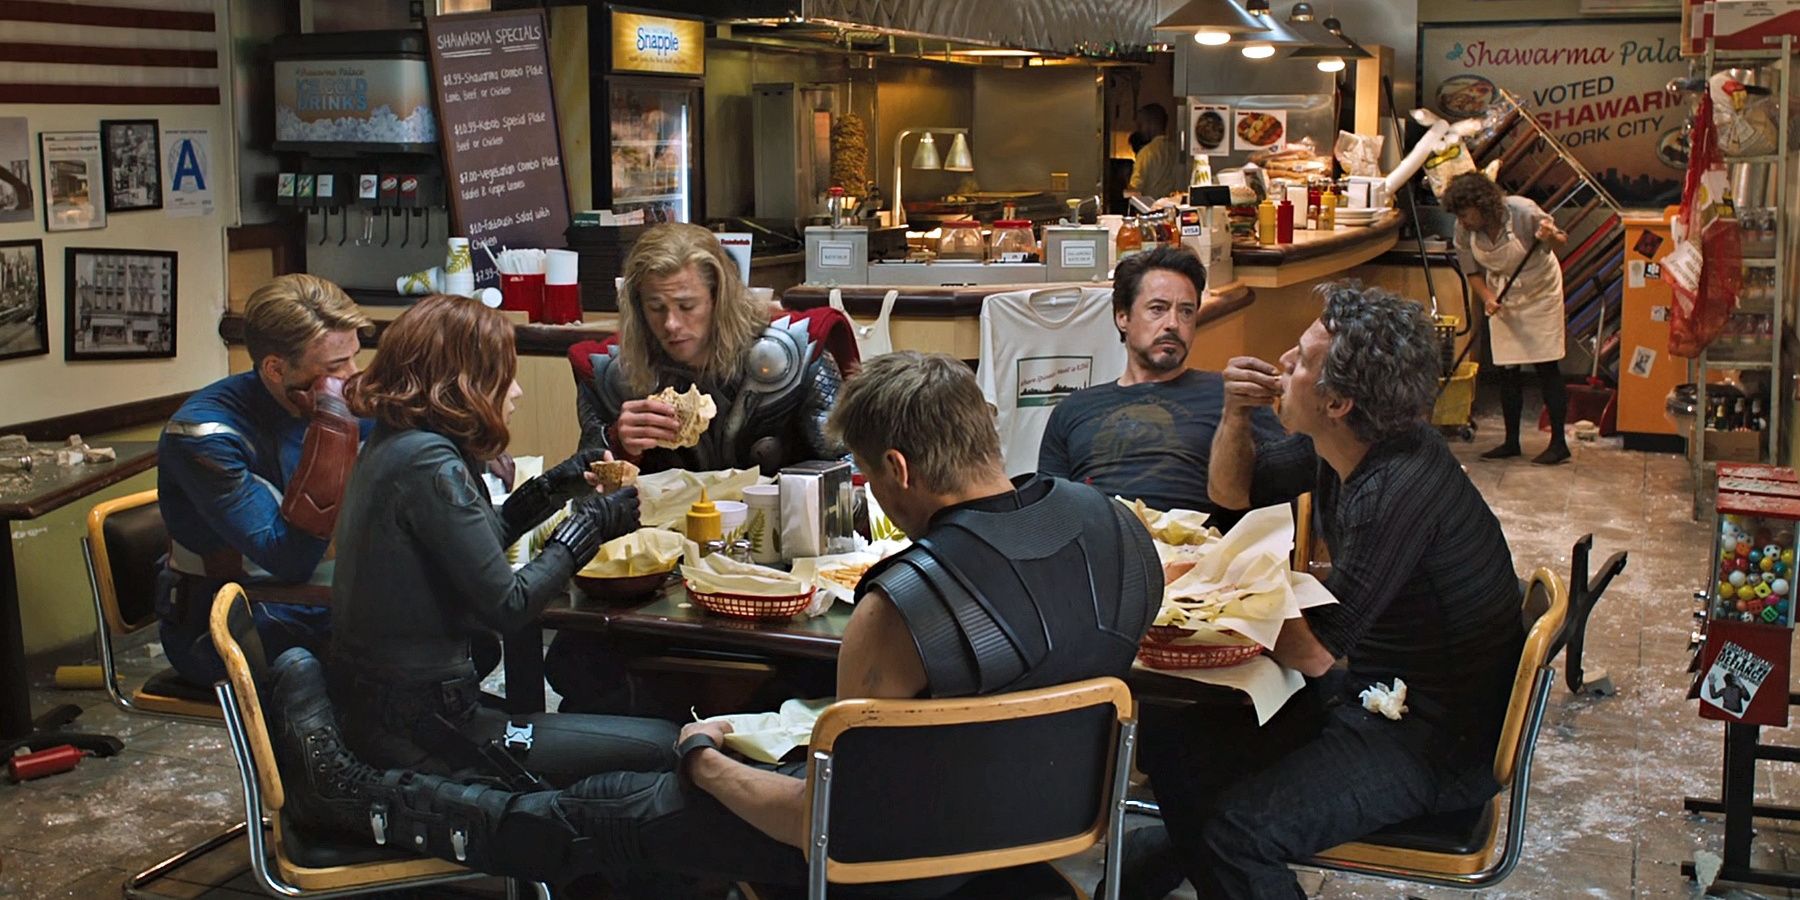 The Avengers eating after the battle